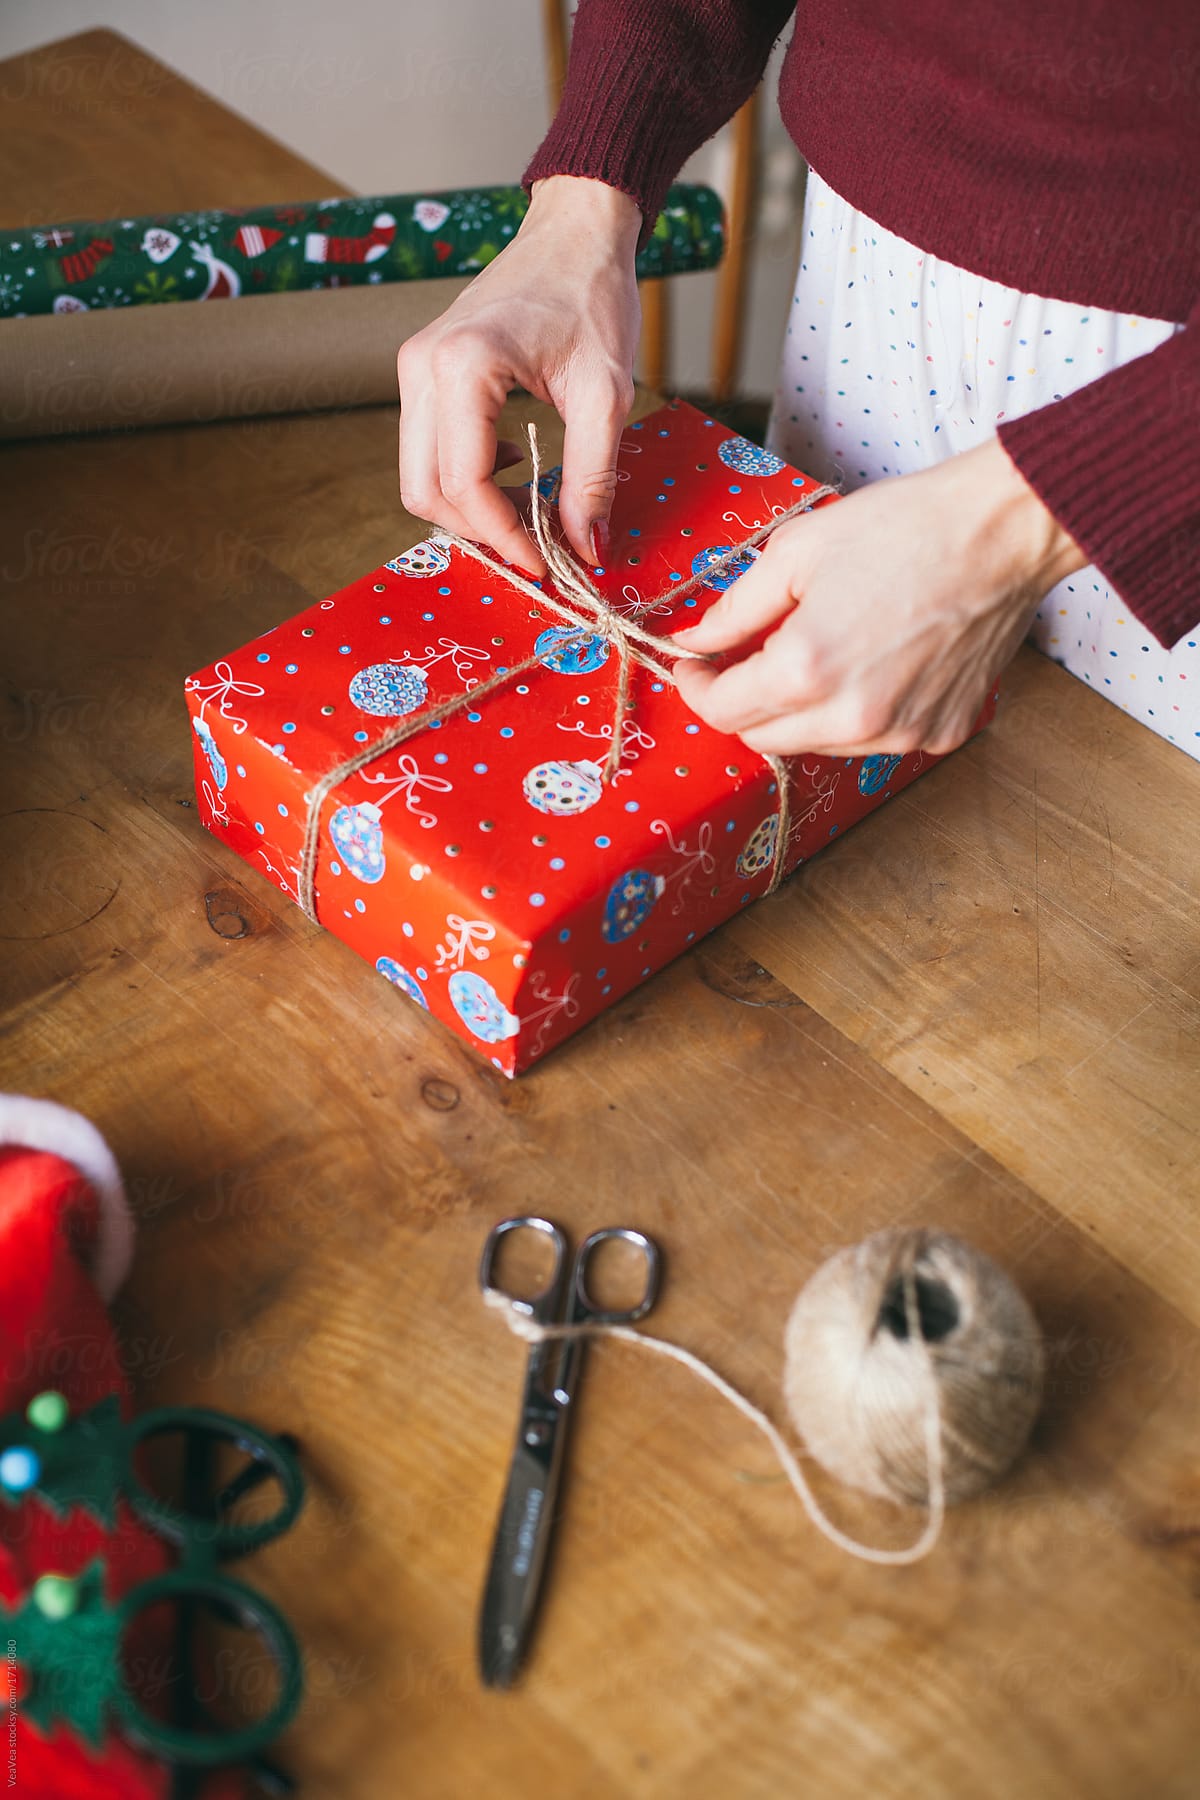 Woman wrapping Christmas presents indoor